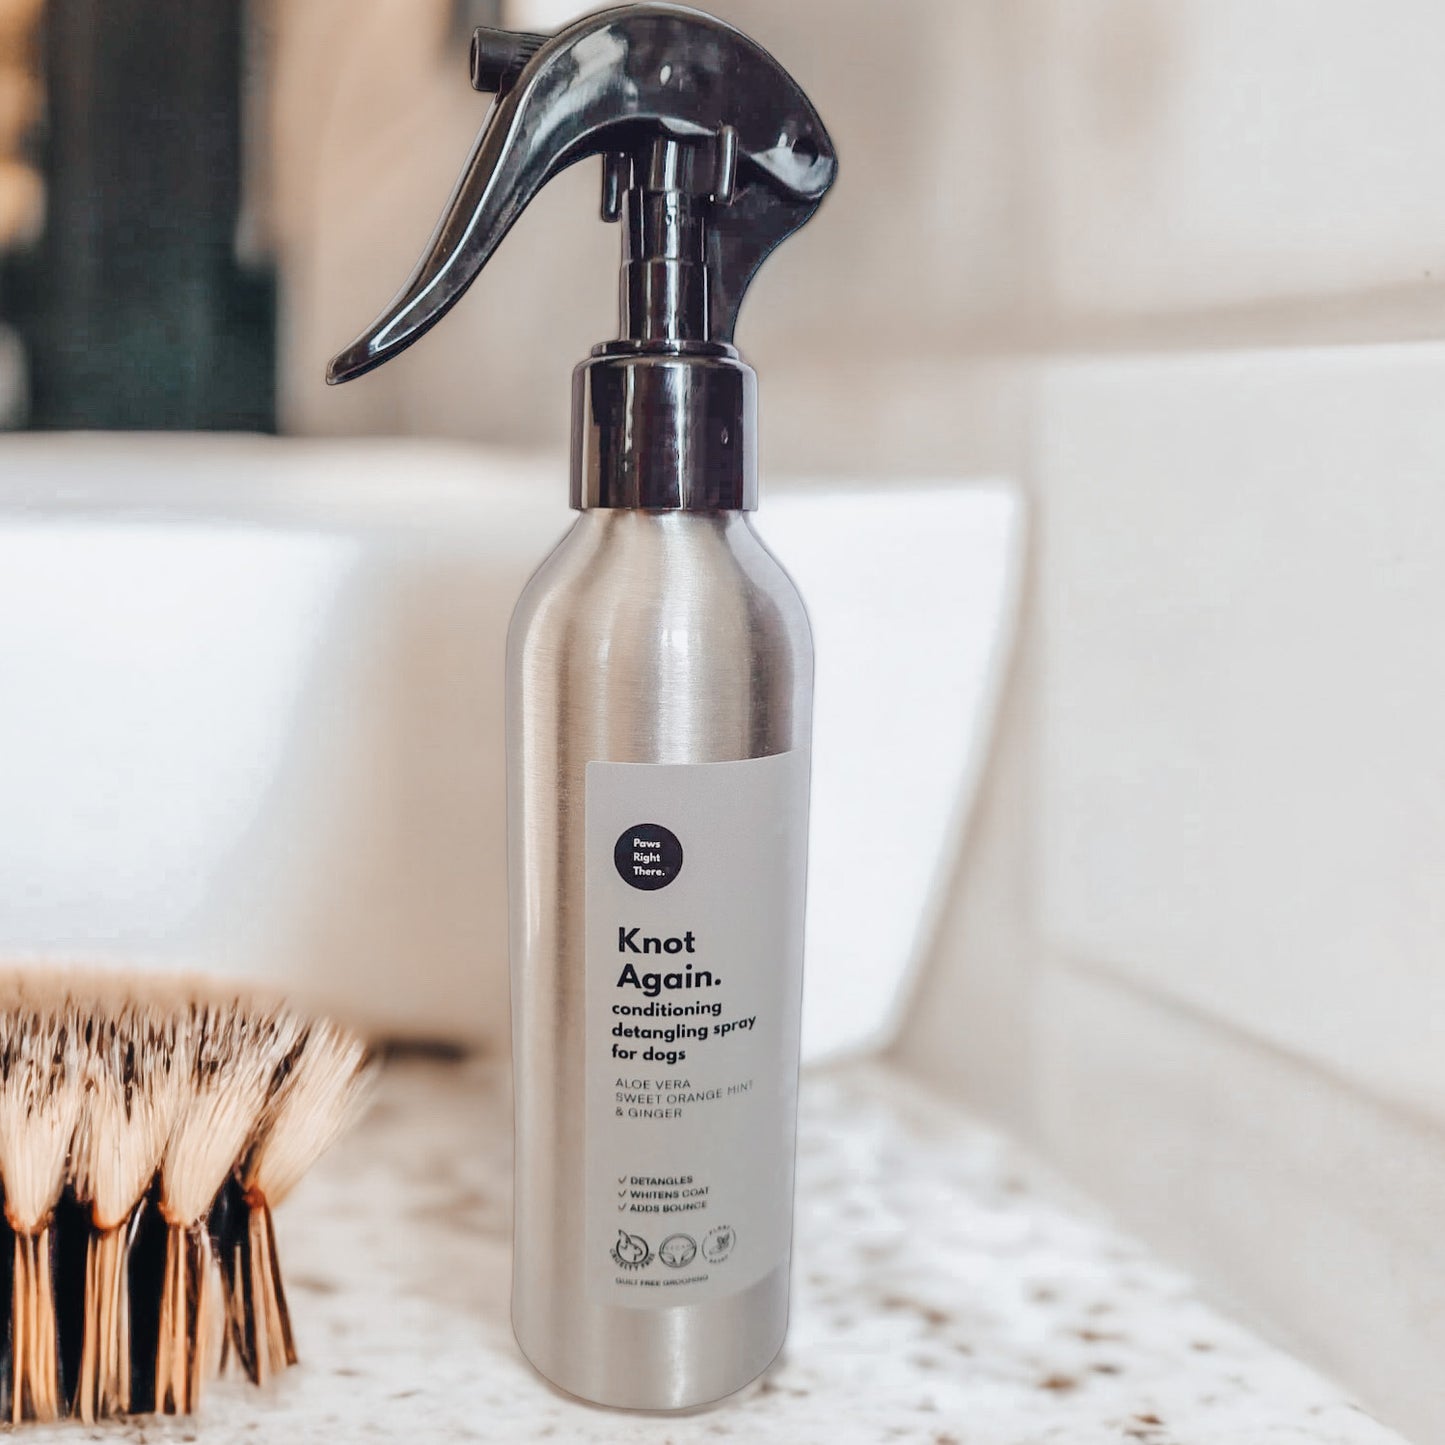 ‘Knot Again’ conditioning detangling spray